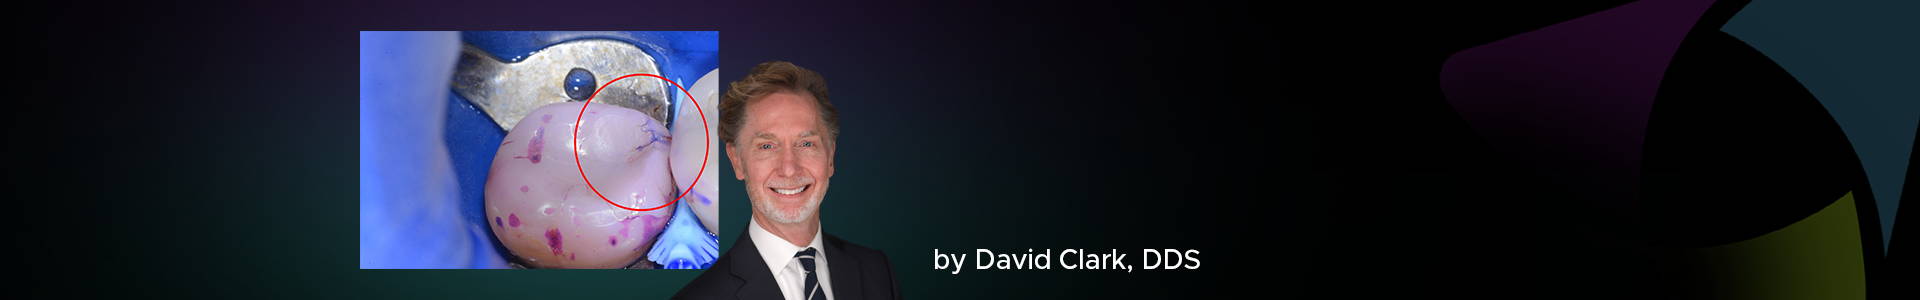 dr. david clark and the image of two adjacent teeth after the application of disclosing solution